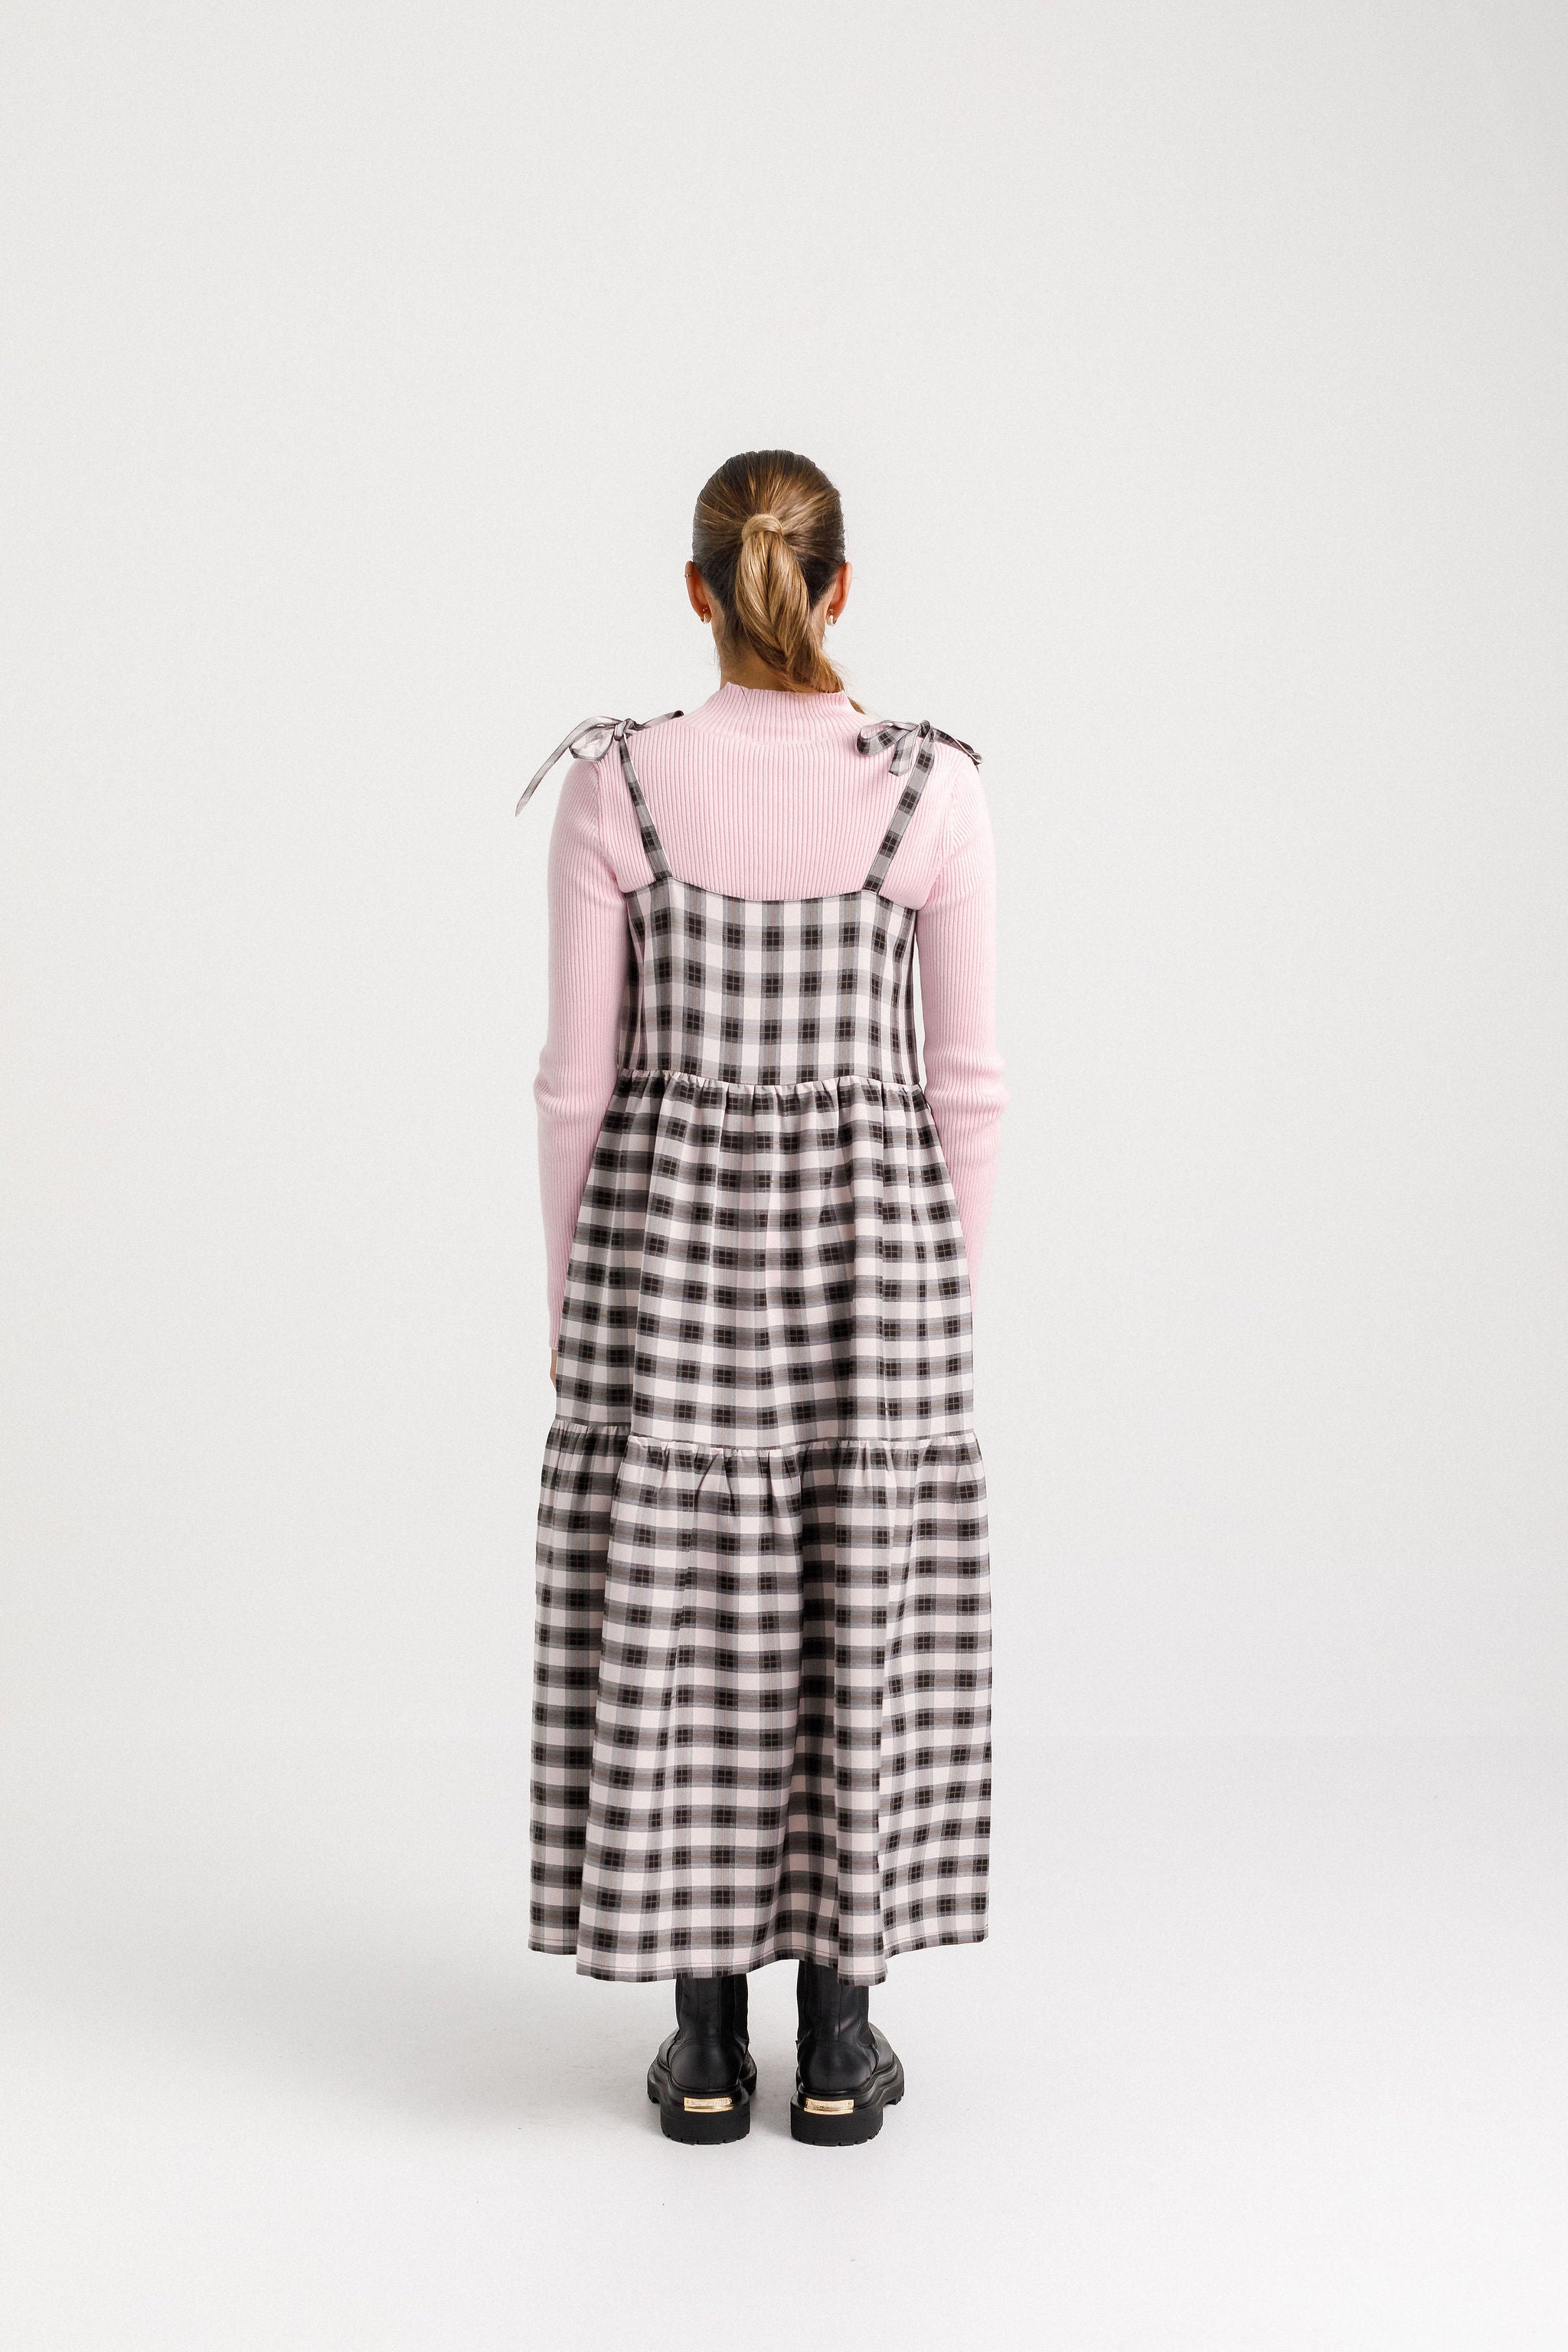 Coming Soon - Tie Up Ziggy Dress - Soft Pink Check